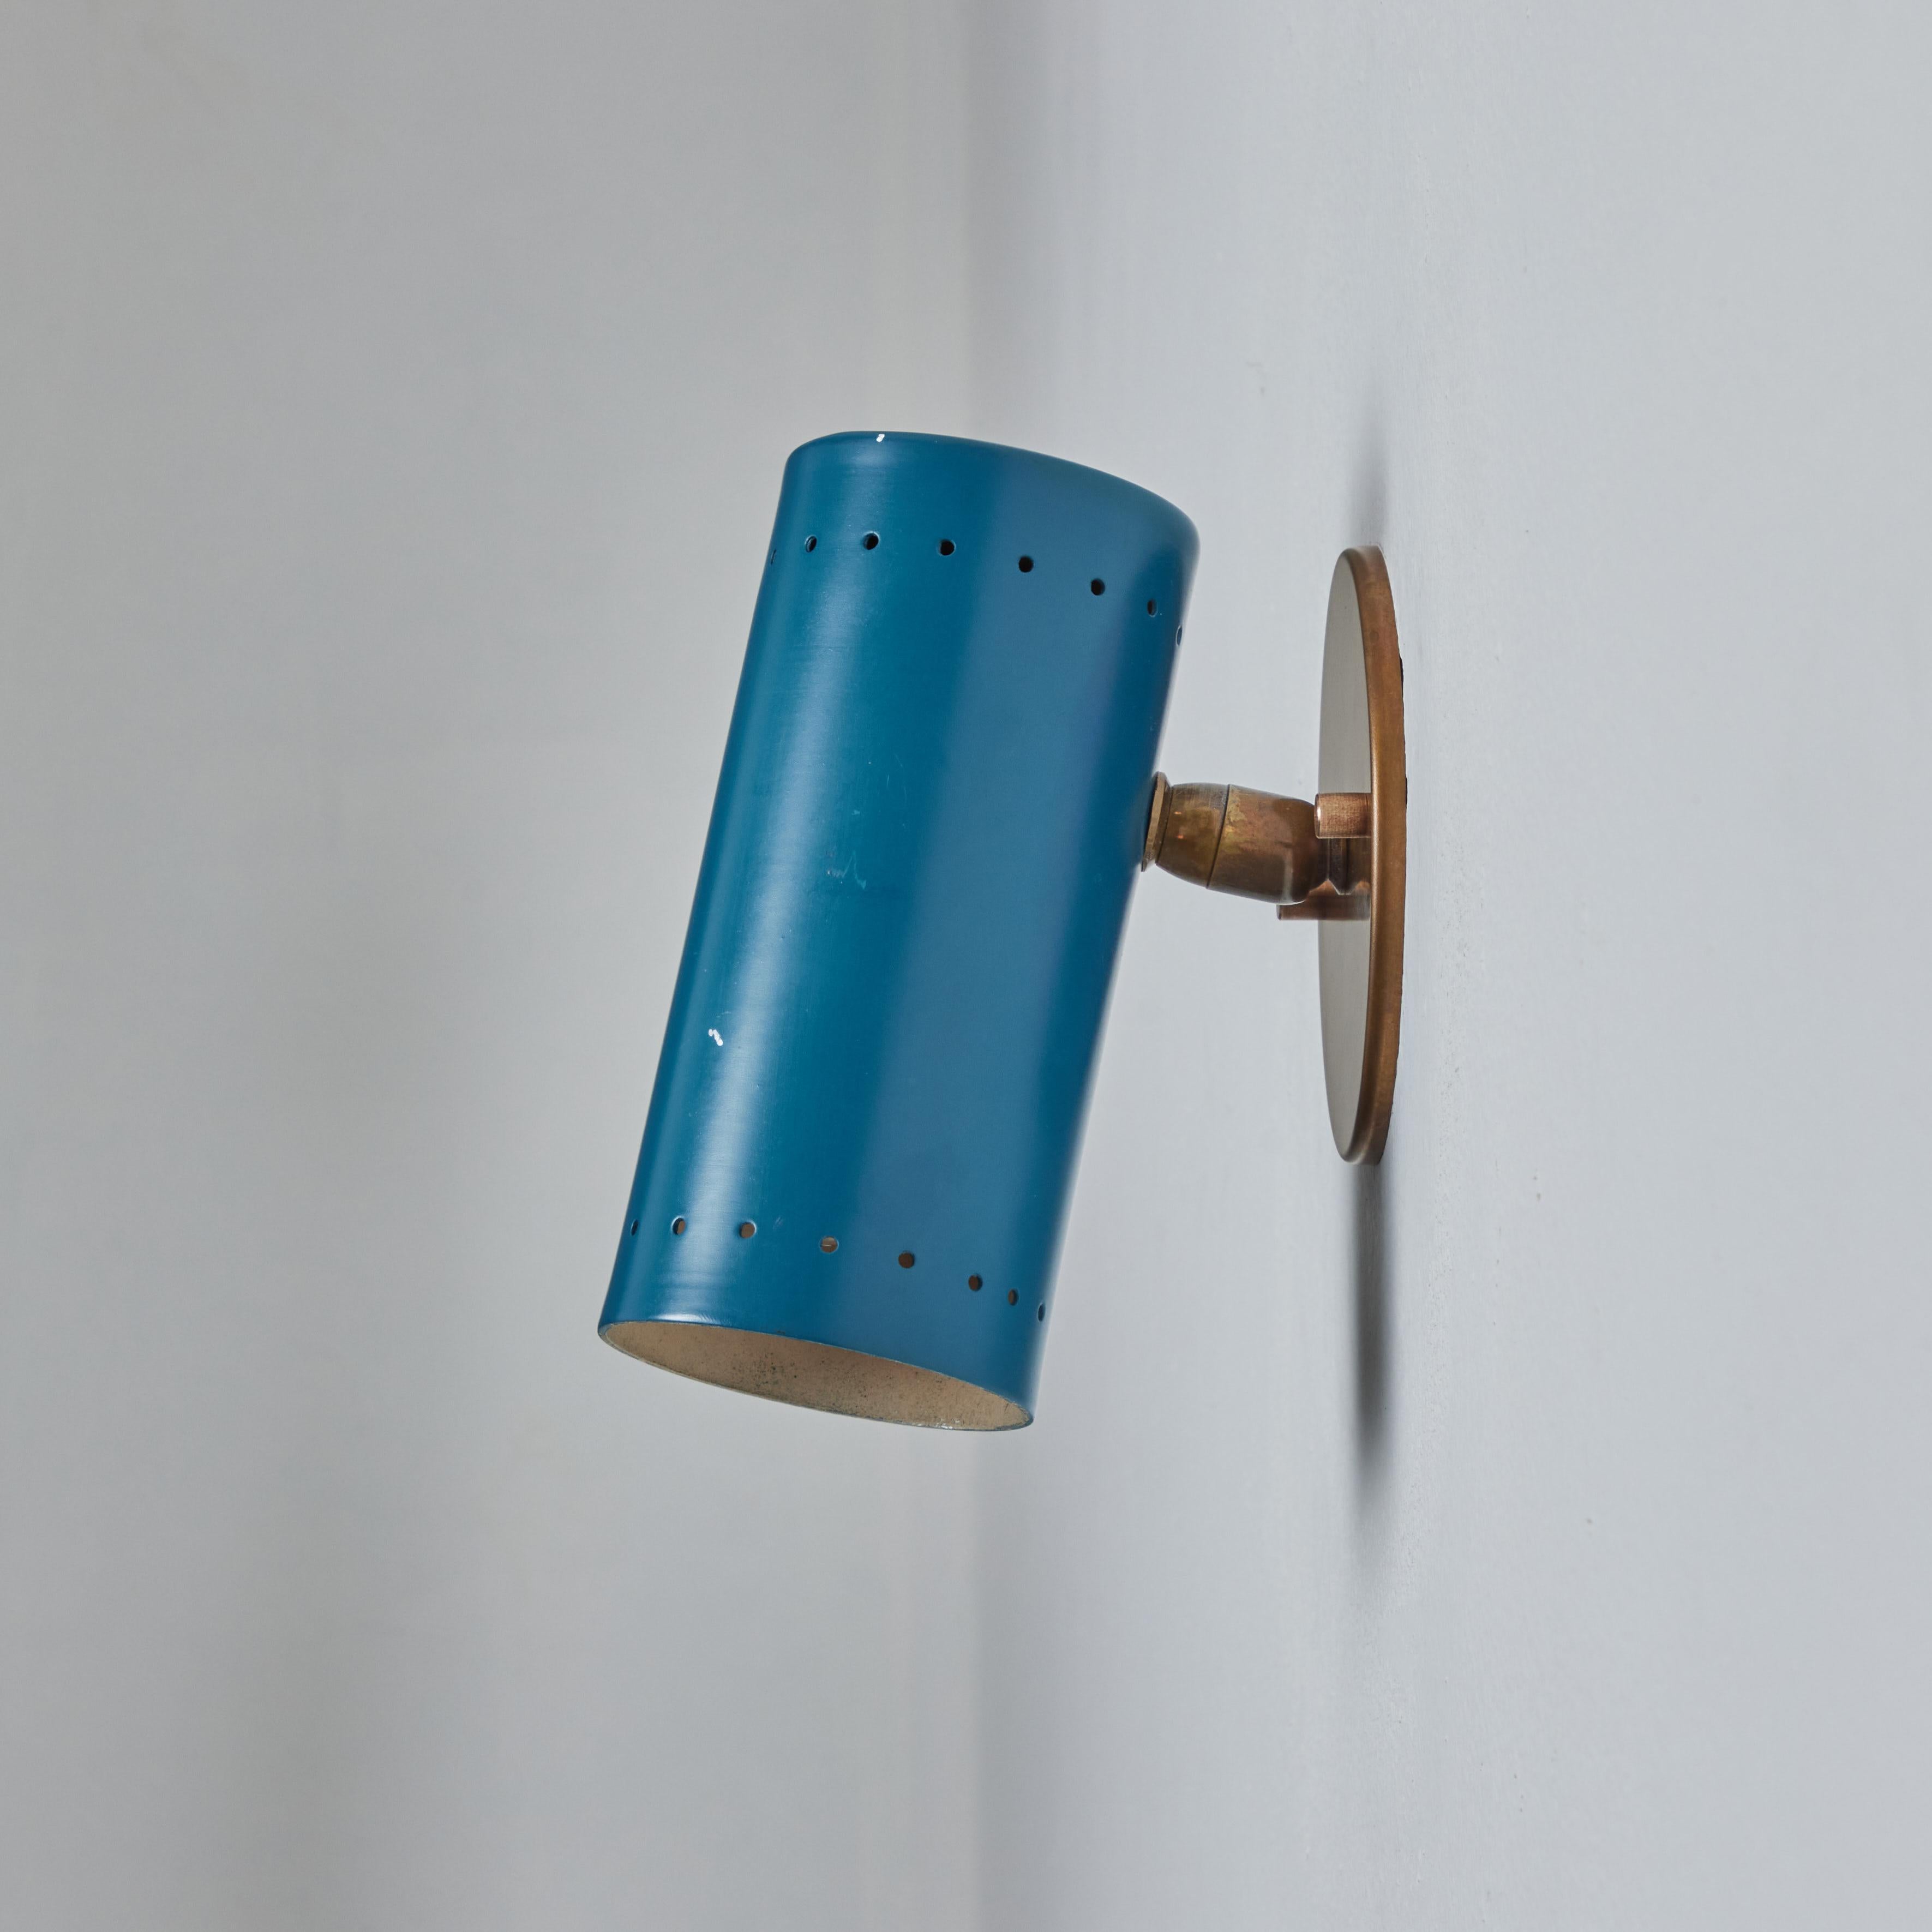 1960s Tito Agnoli blue perforated metal and brass articulating sconce for O-Luce. One of his most highly refined Minimalist designs. Sleek and functional yet at the same time bright and playful. A highly adjustable wall light, the tubular shade